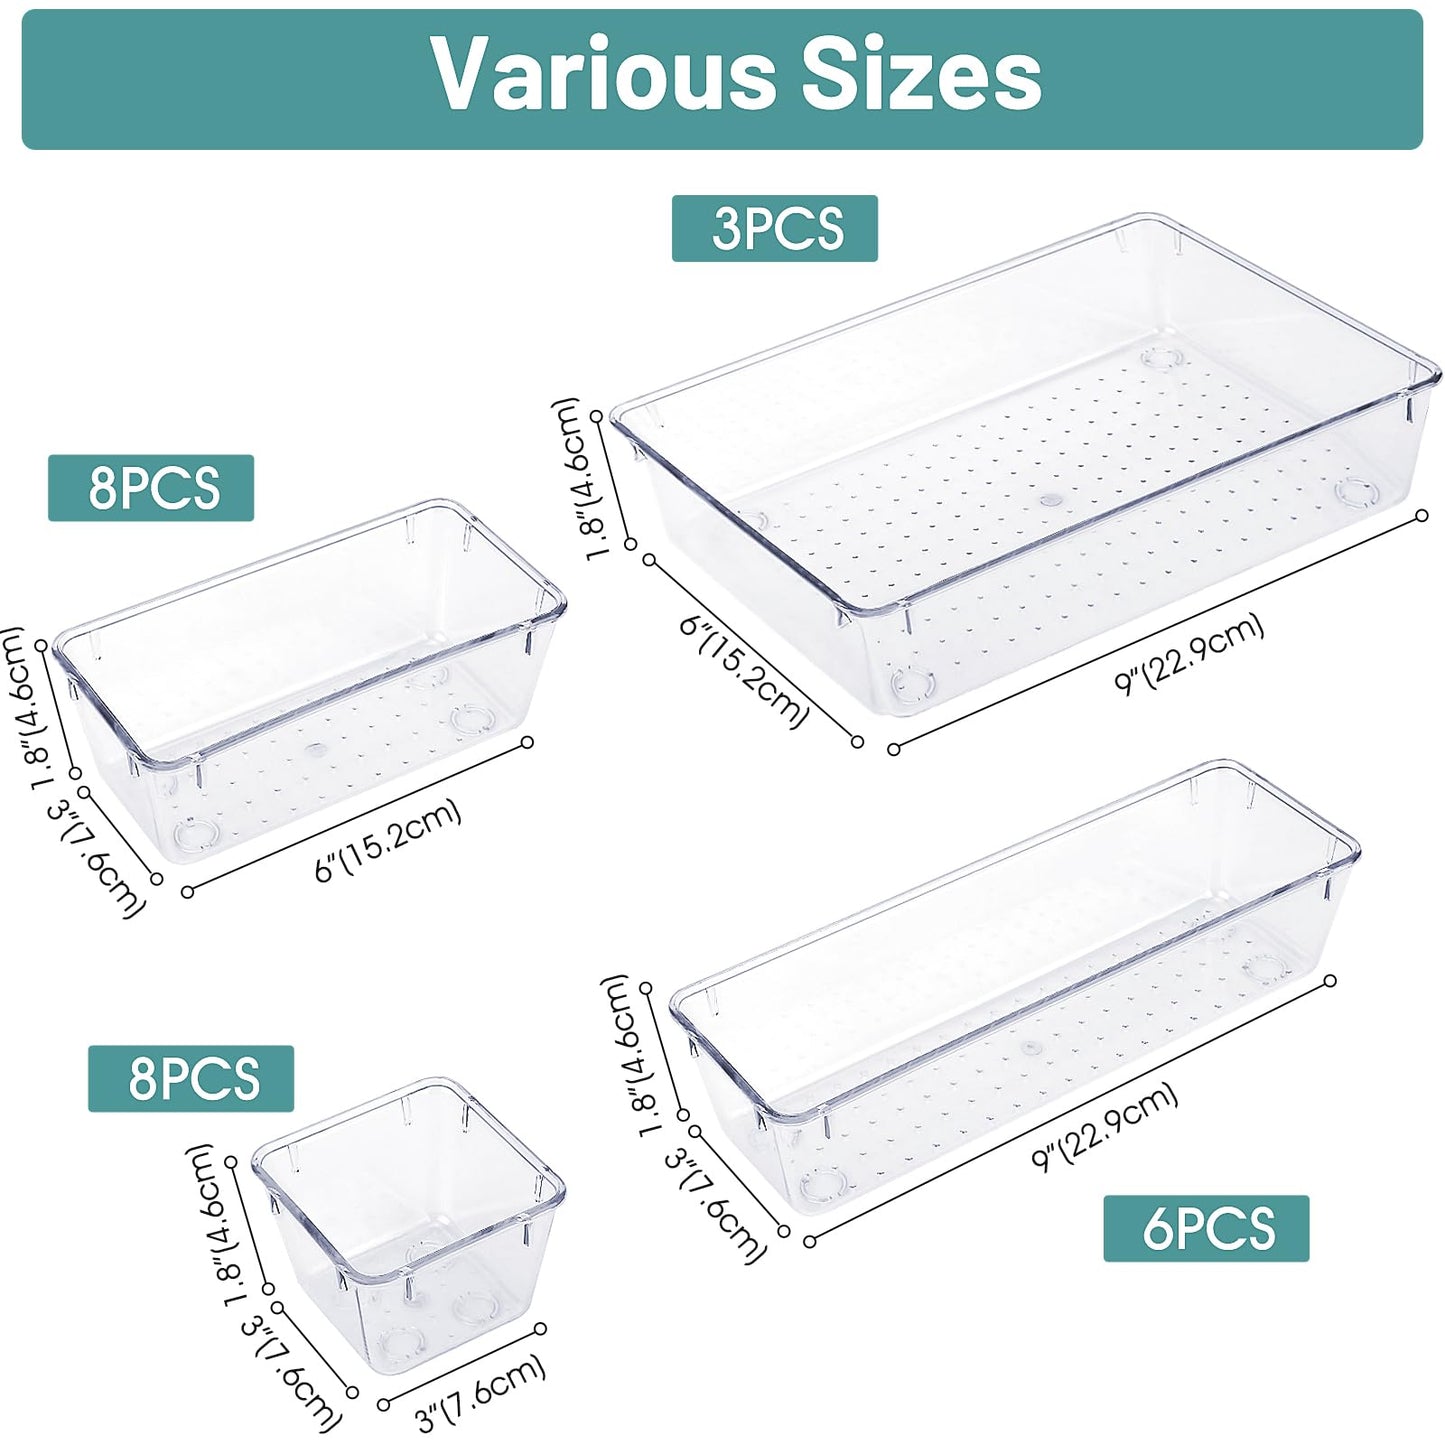 25 PCS Clear Plastic Drawer Organizer Set, 4 Sizes Desk Drawer Divider Organizers and Storage Bins for Makeup, Jewelry, Gadgets for Kitchen, Bedroom, Bathroom, Office